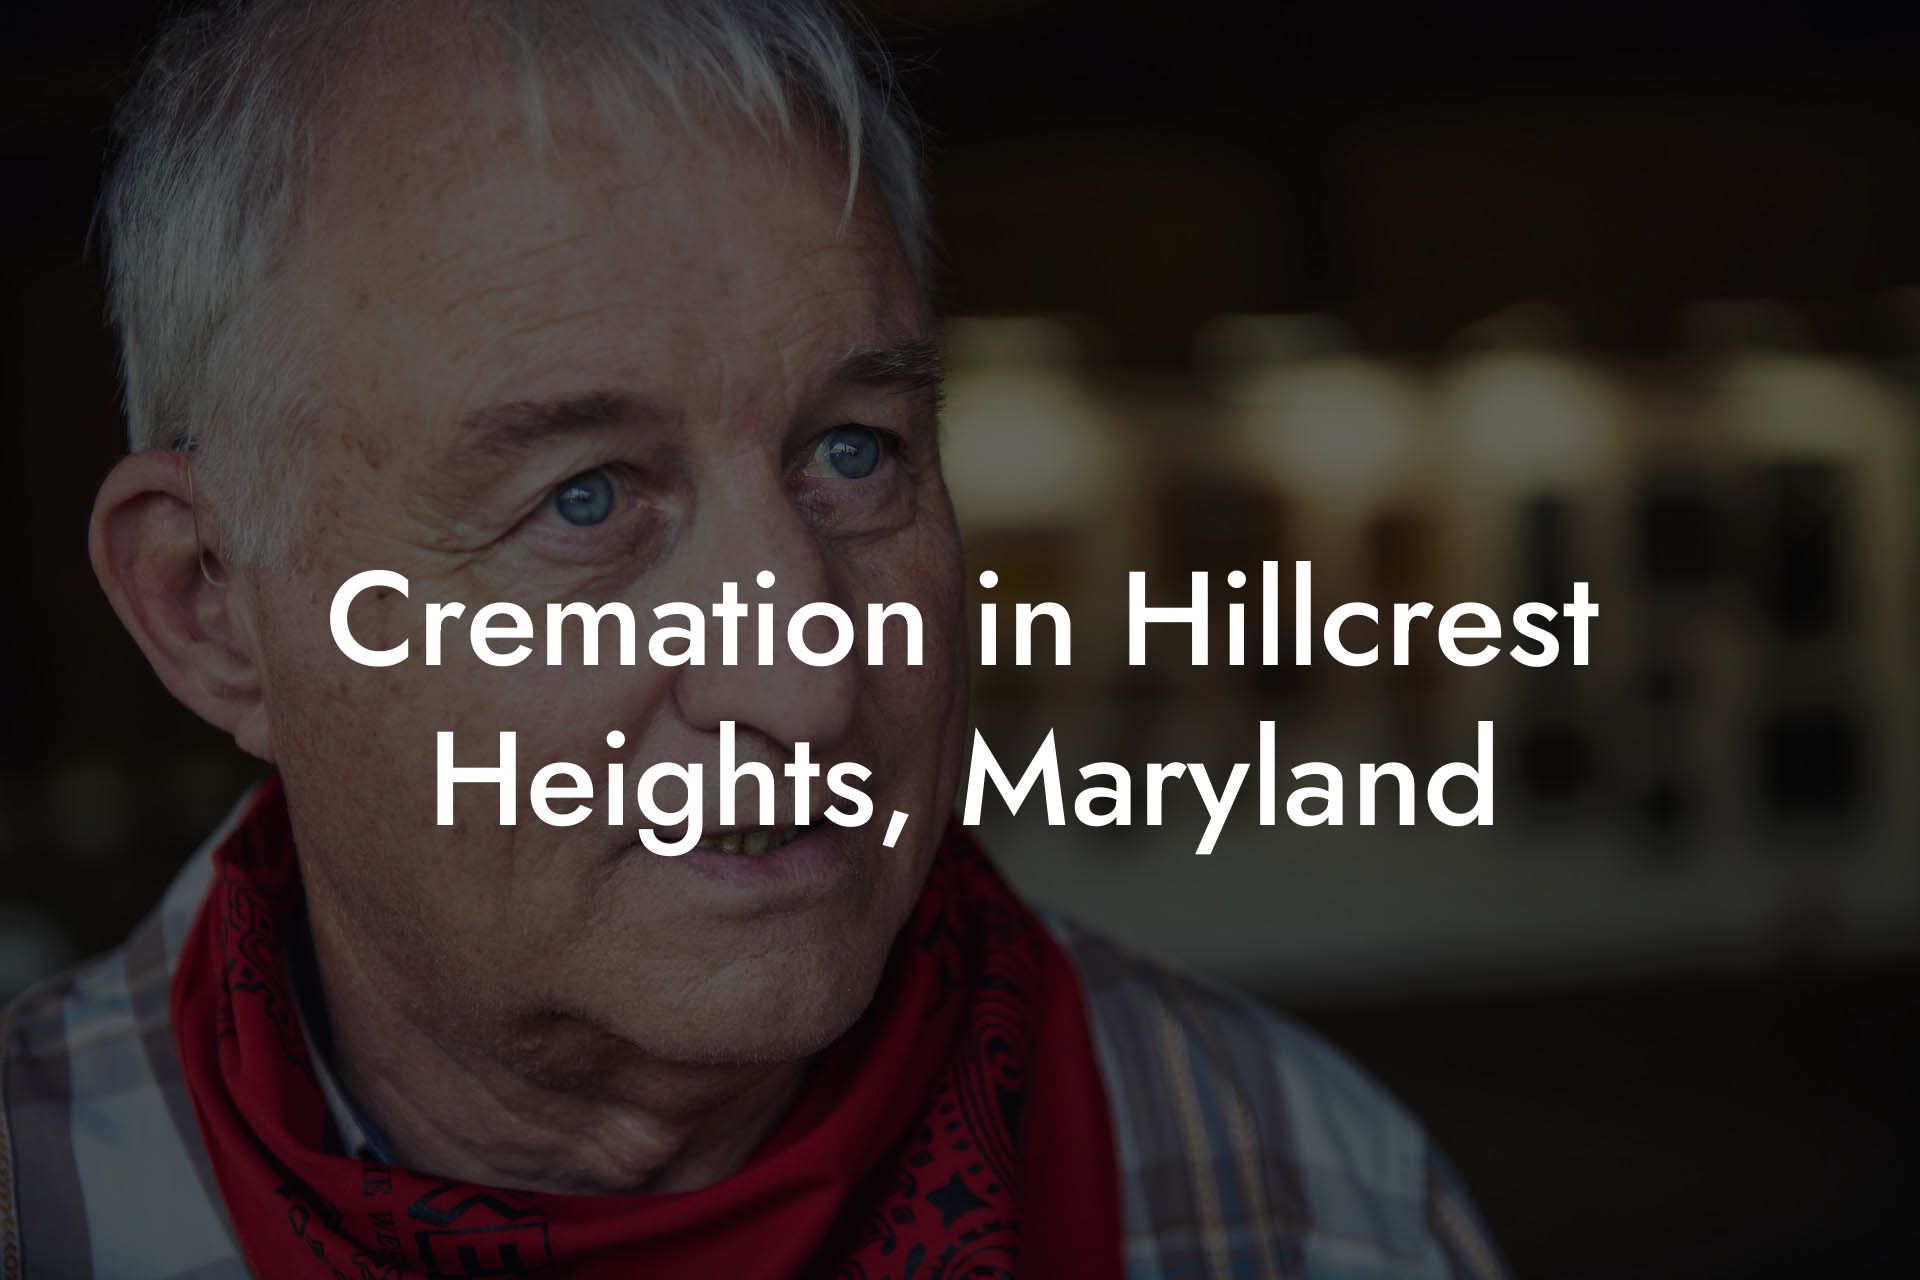 Cremation in Hillcrest Heights, Maryland